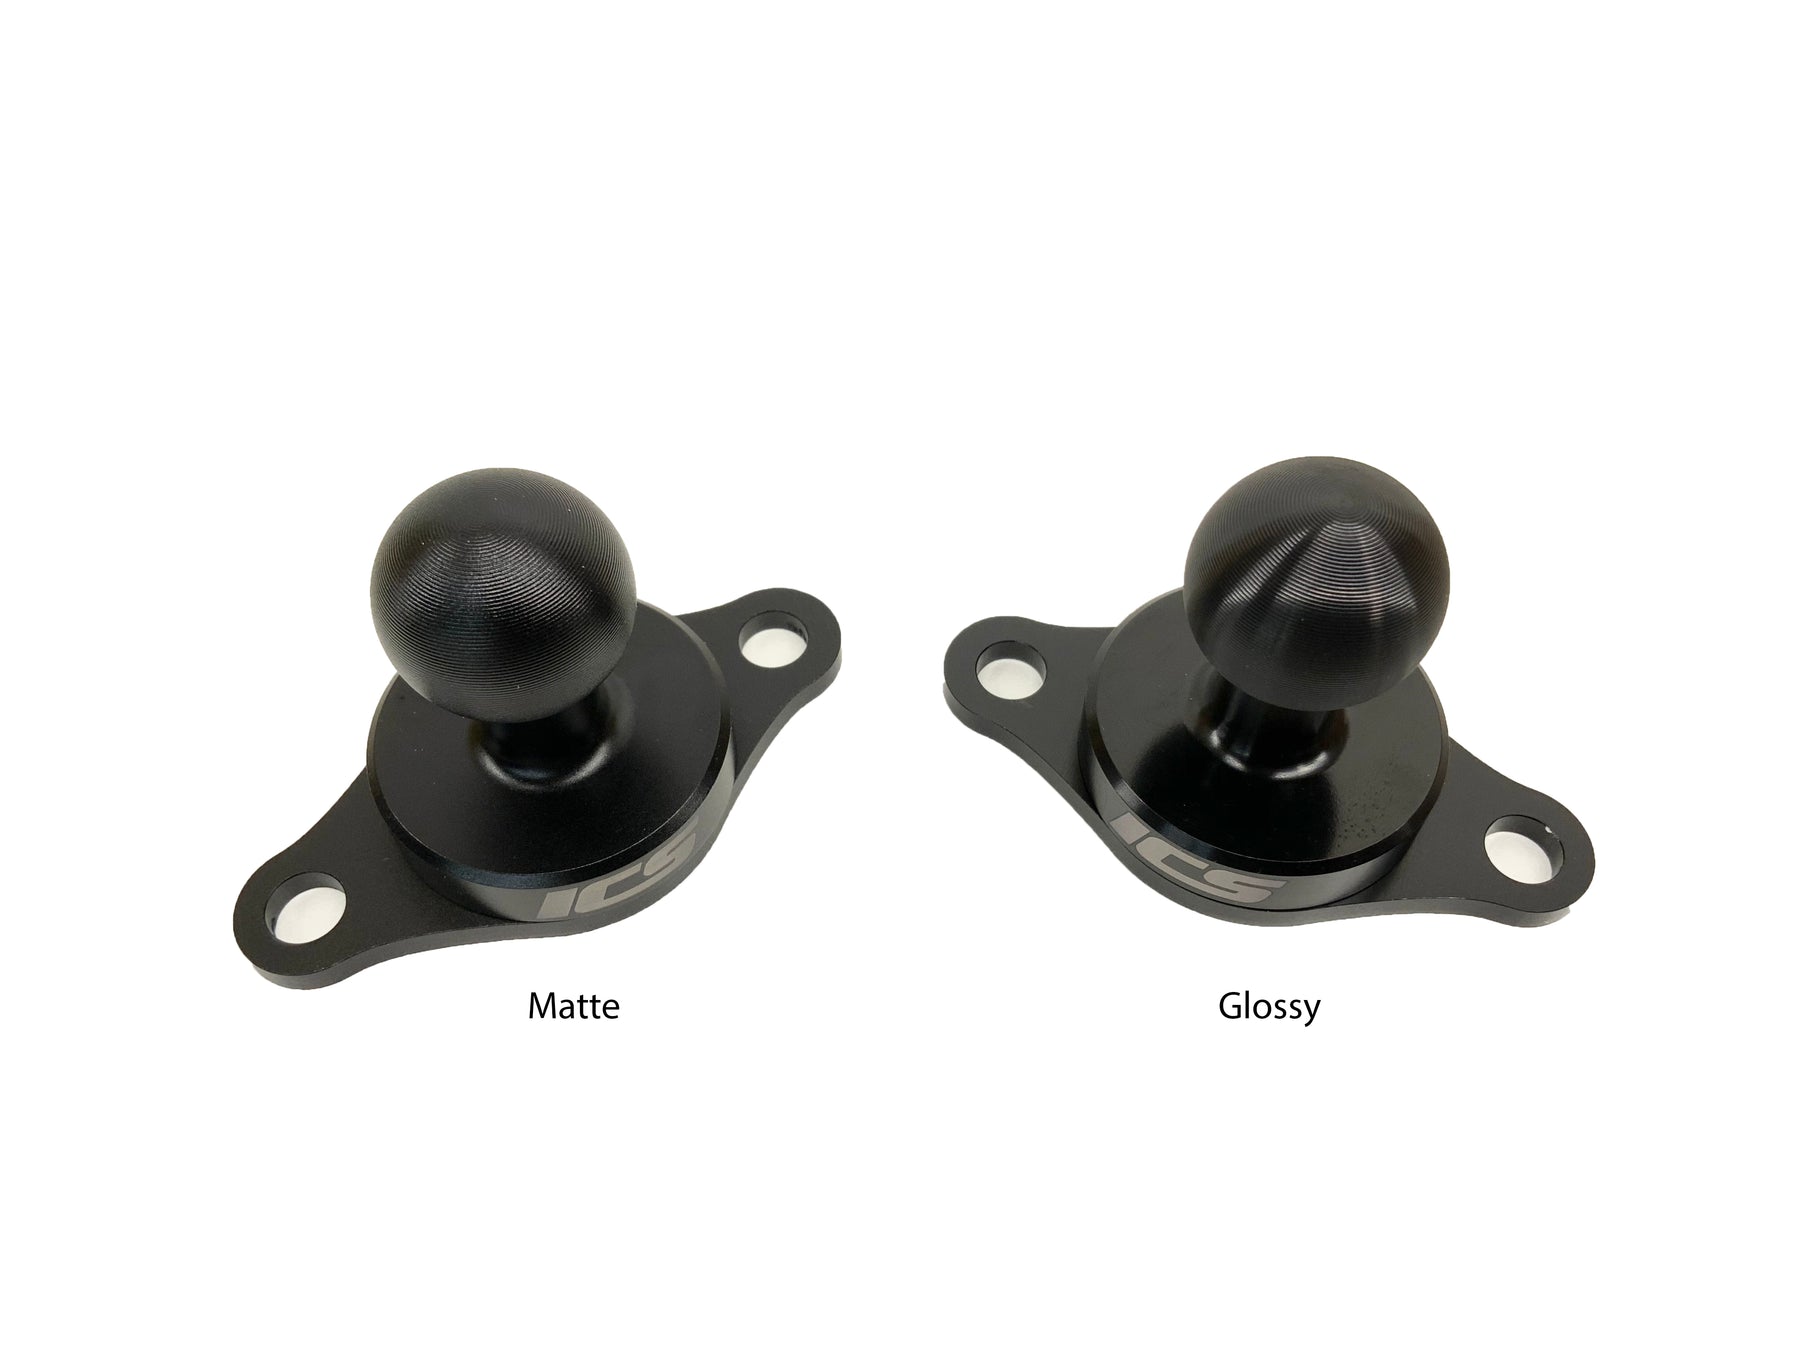 2 Hole AMPS Ball Mount - Glossy